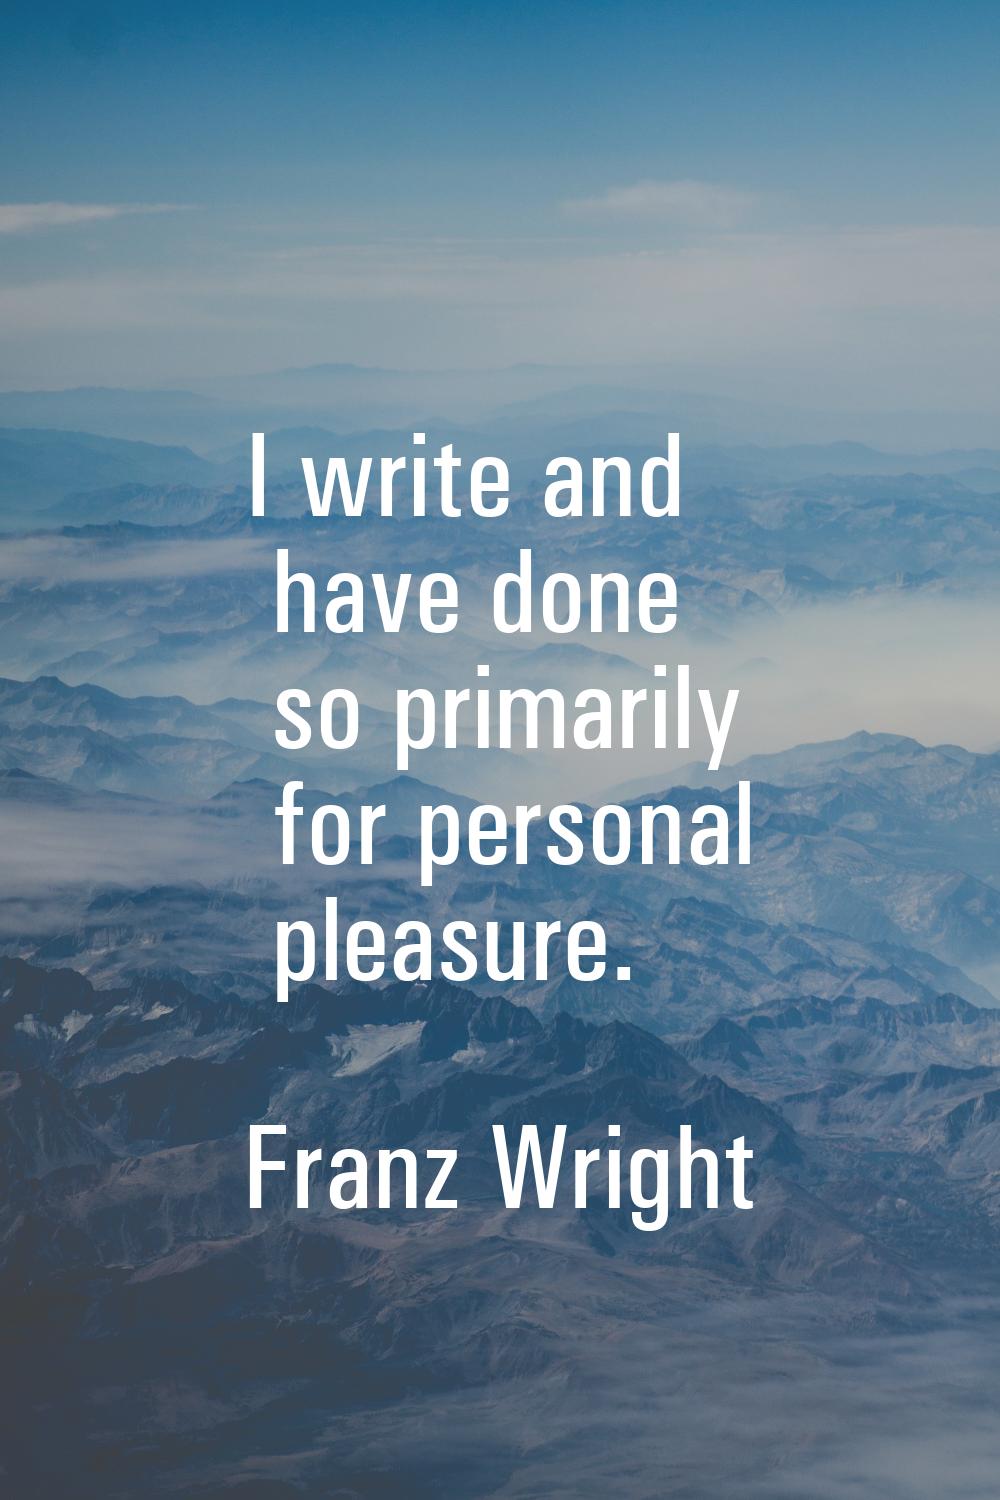 I write and have done so primarily for personal pleasure.